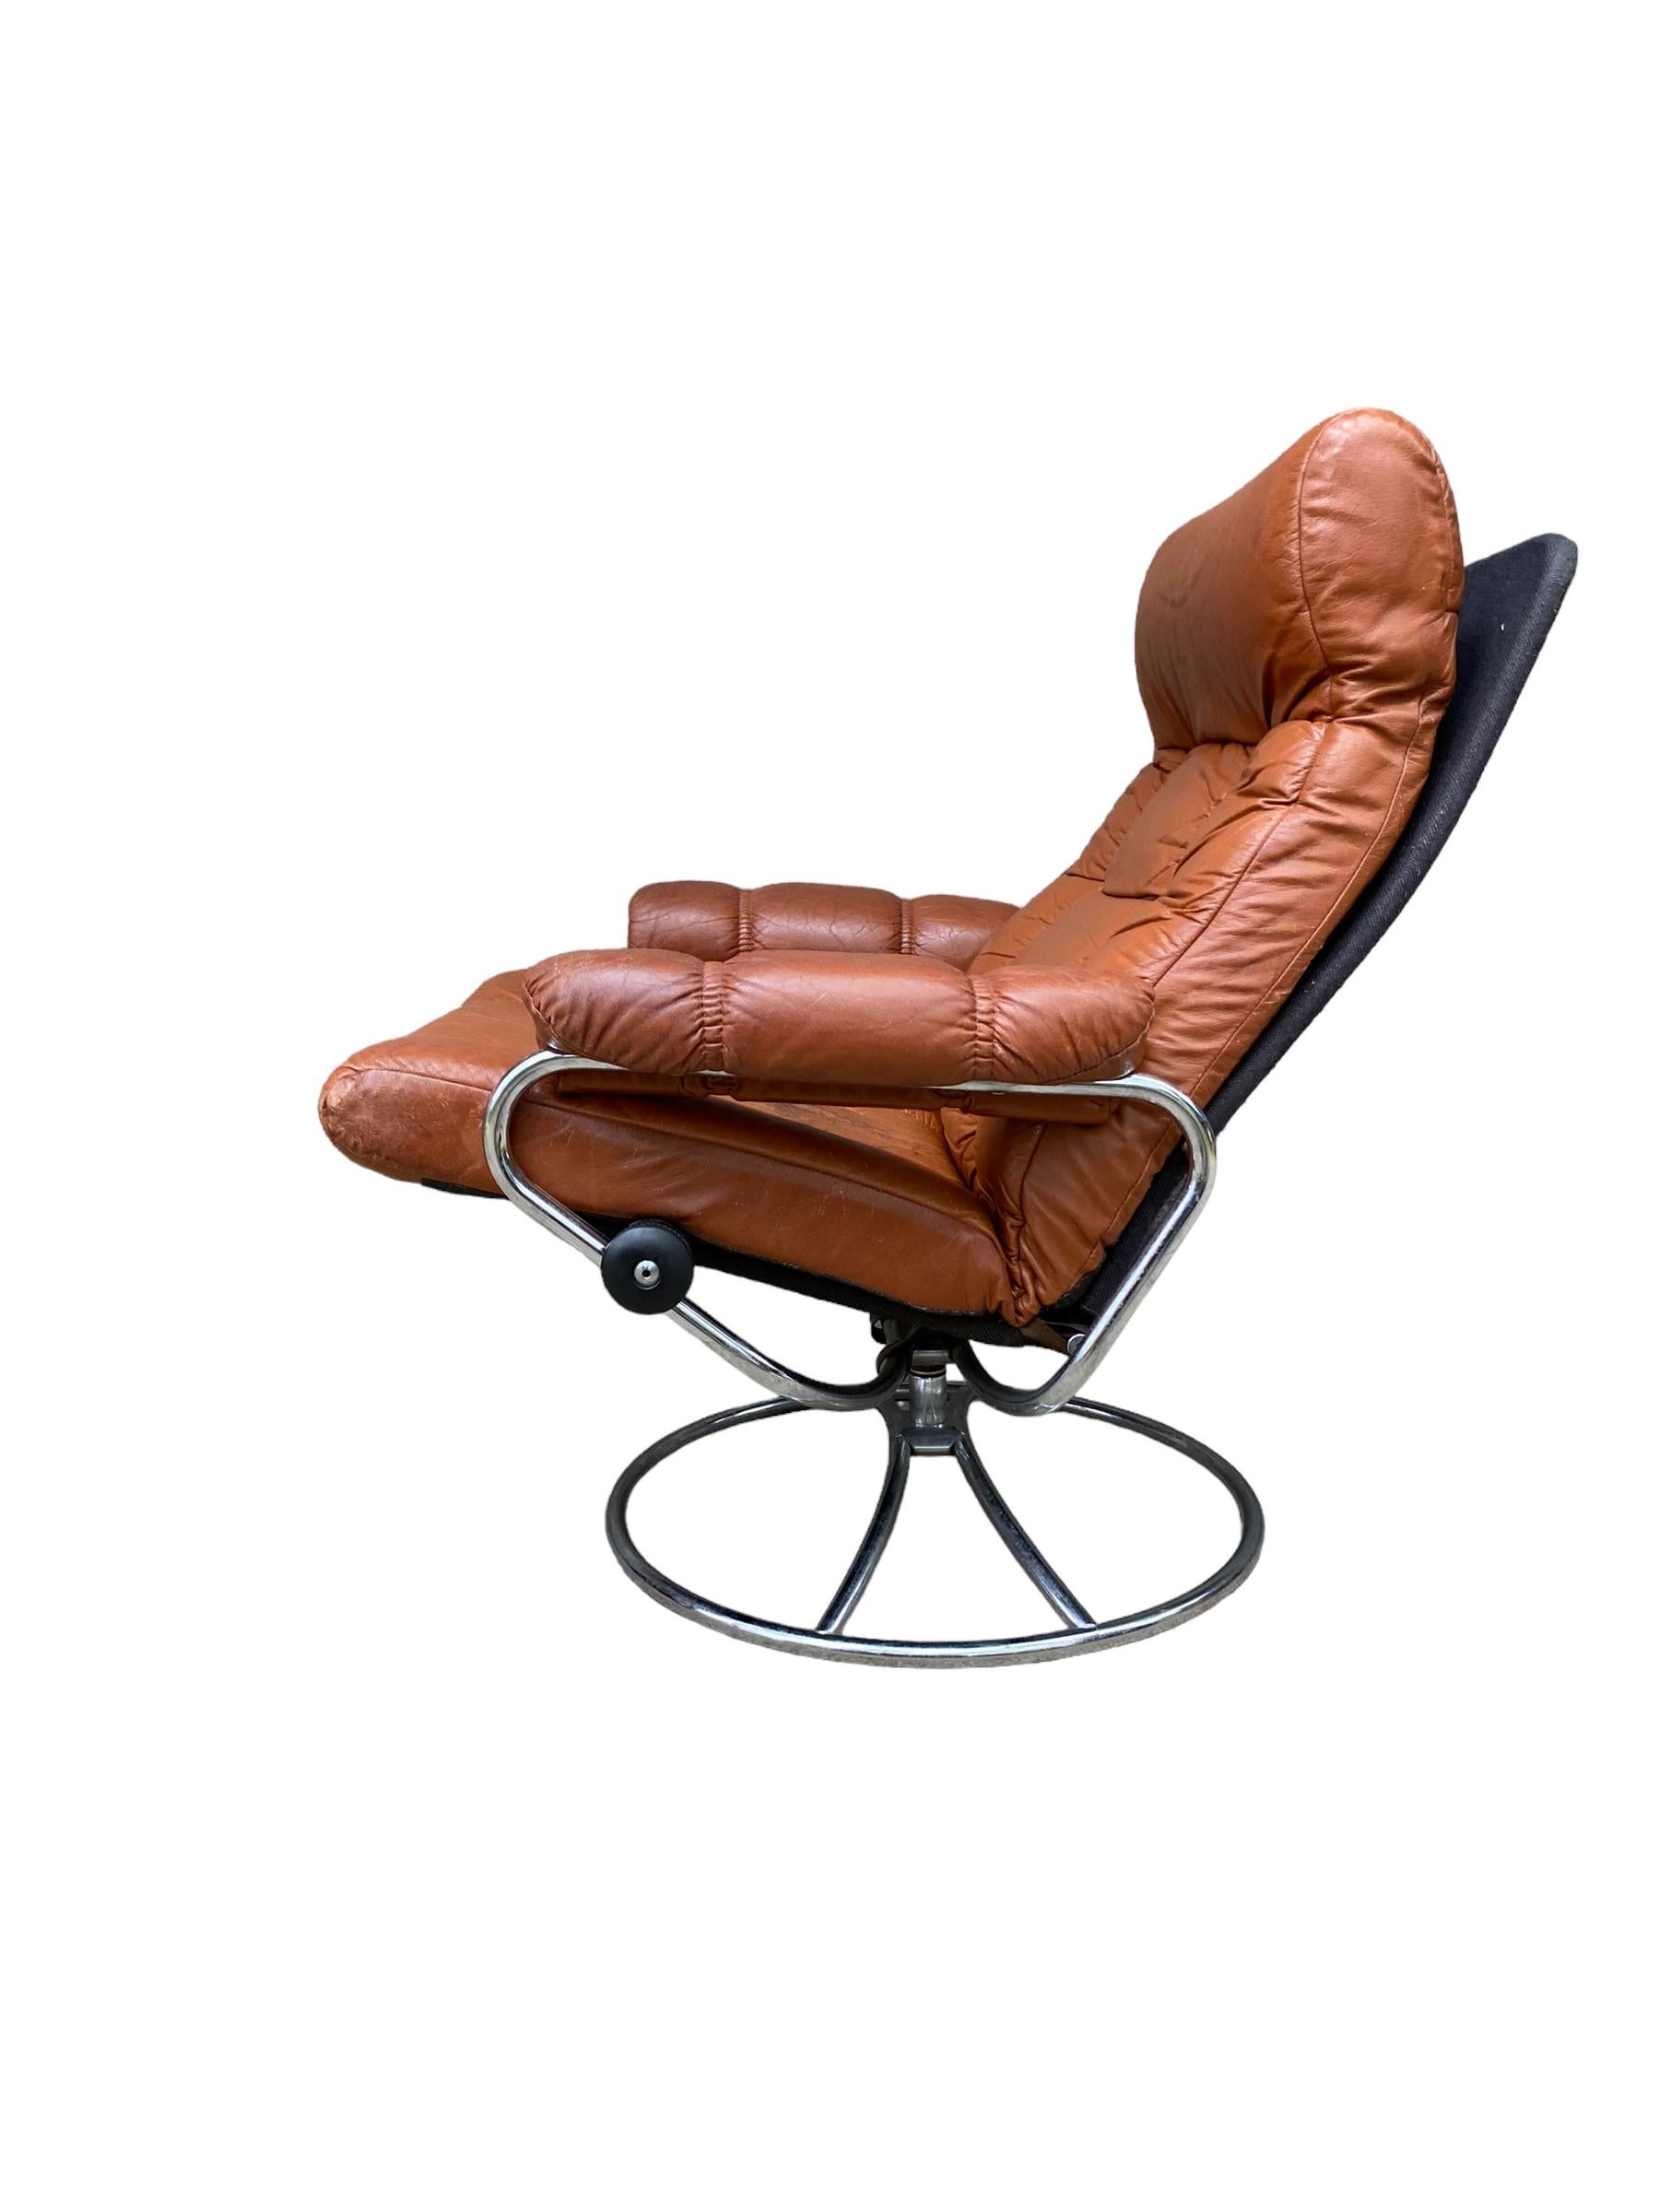 Leather Ekornes Stressless Reclining Lounge Chair and Ottoman